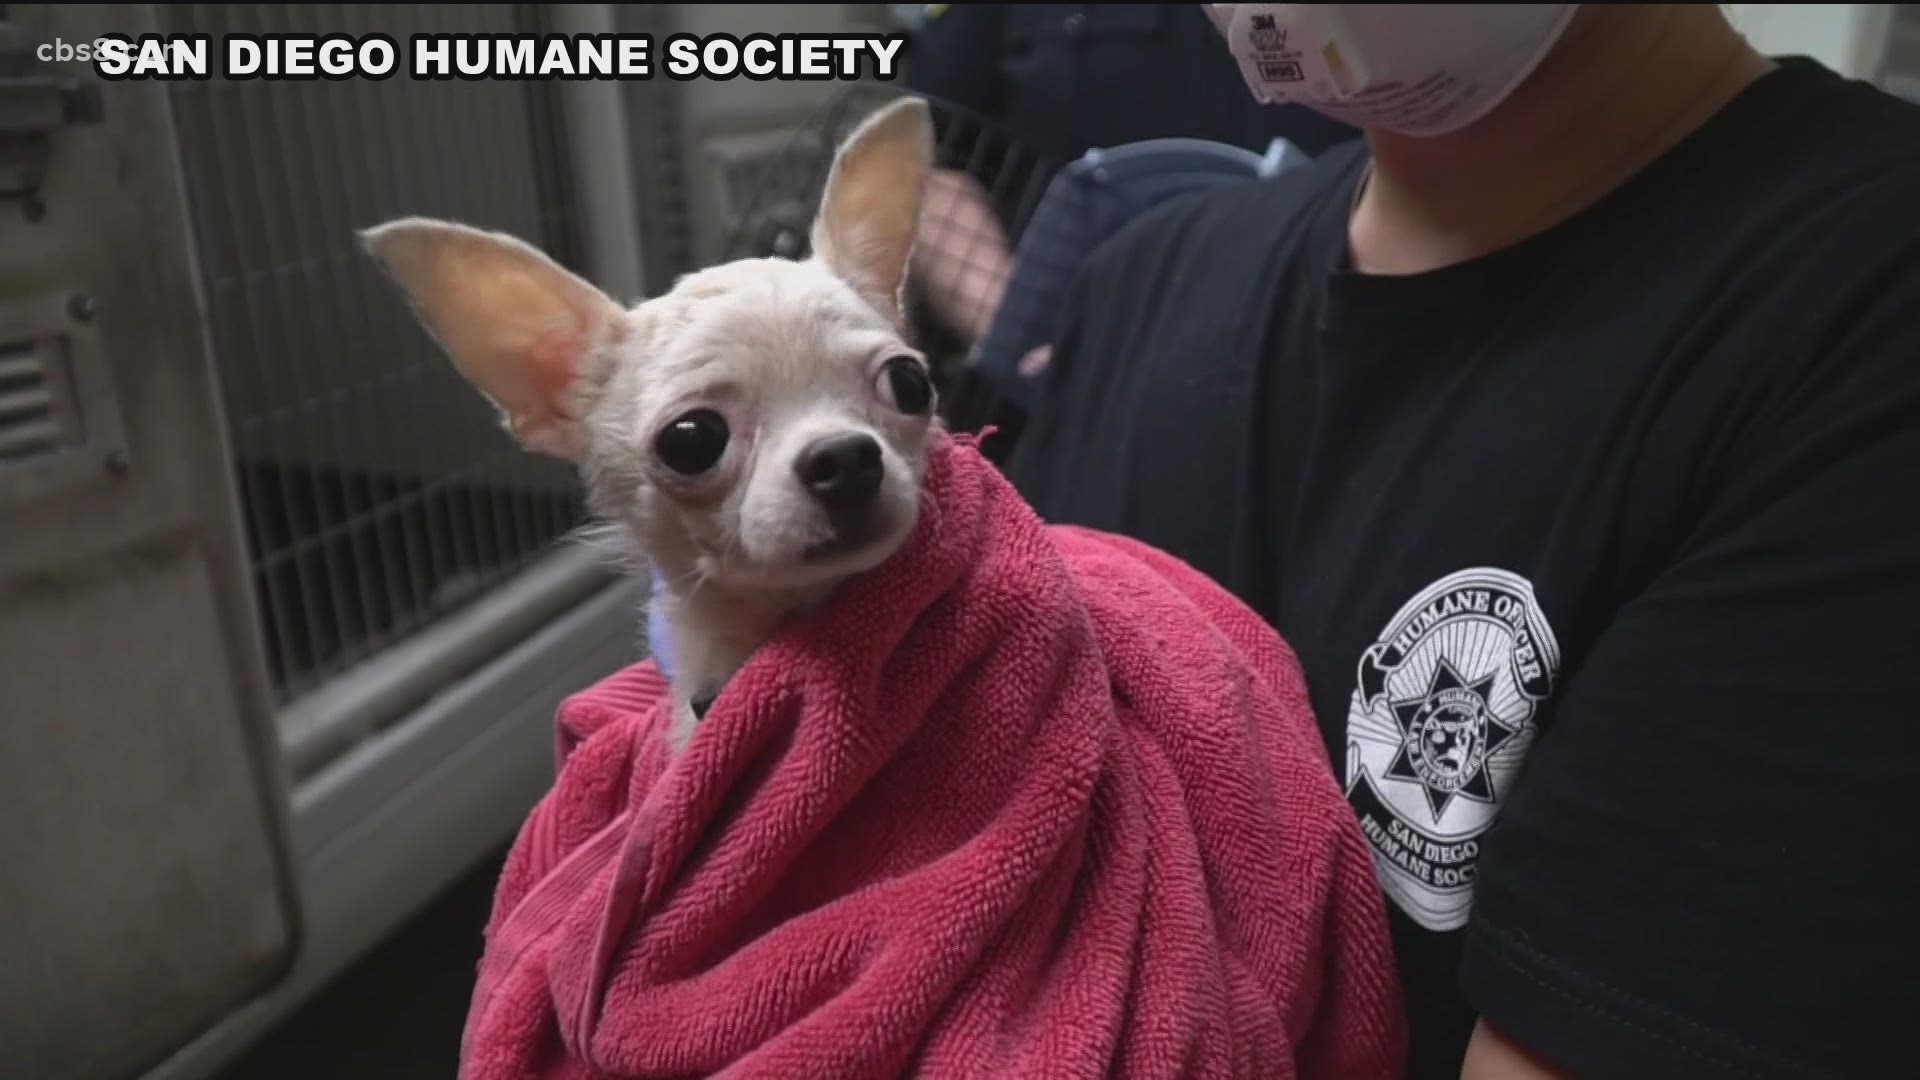 The dogs are currently sheltered at their San Diego Campus, where their team will continue to take care of the dogs.